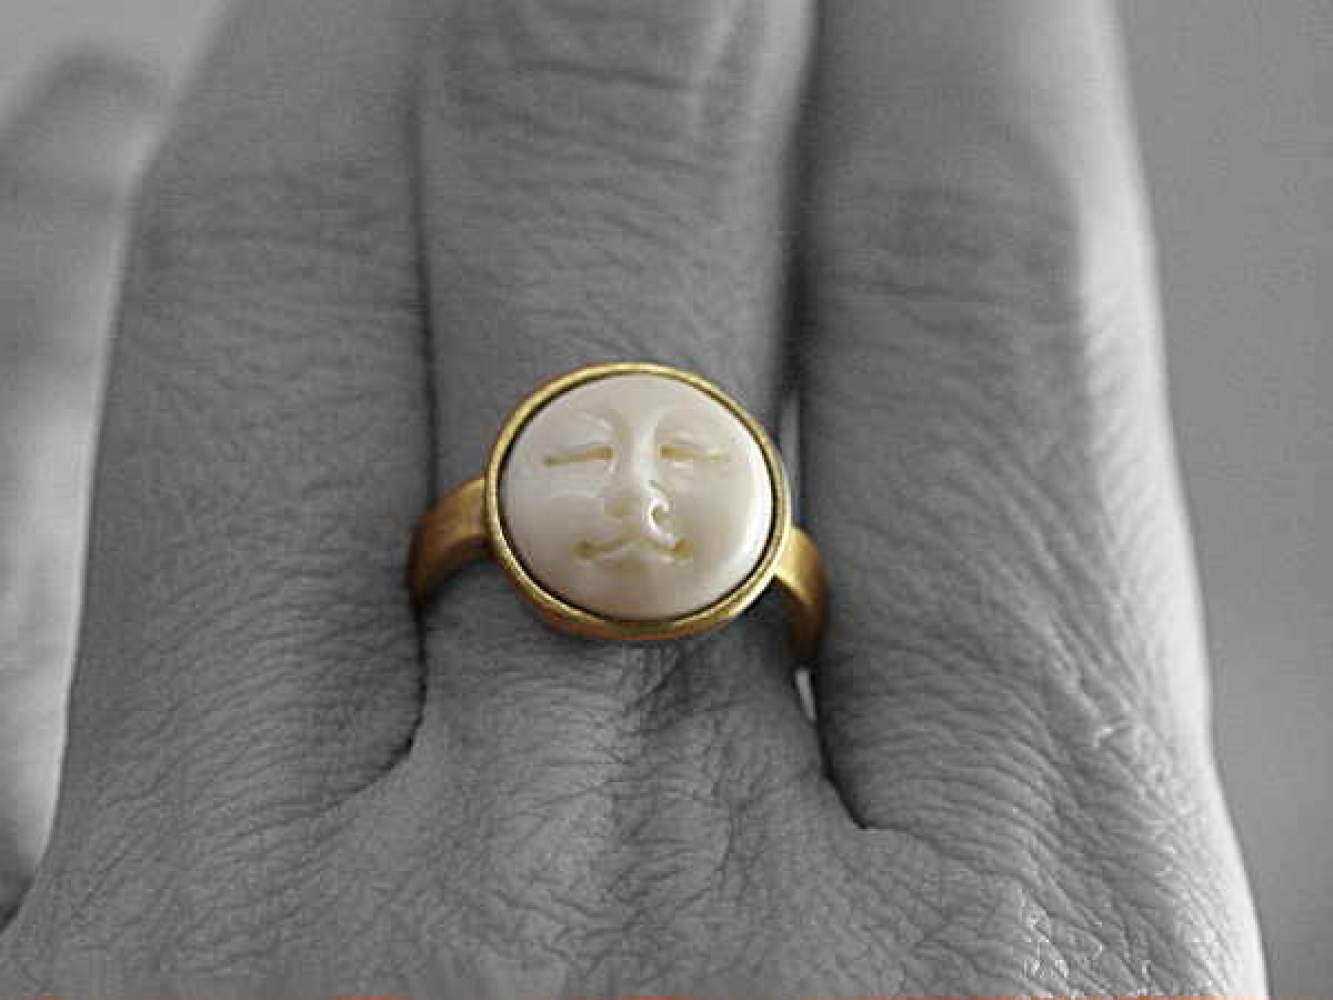 Moon Face Ring. Adjustable